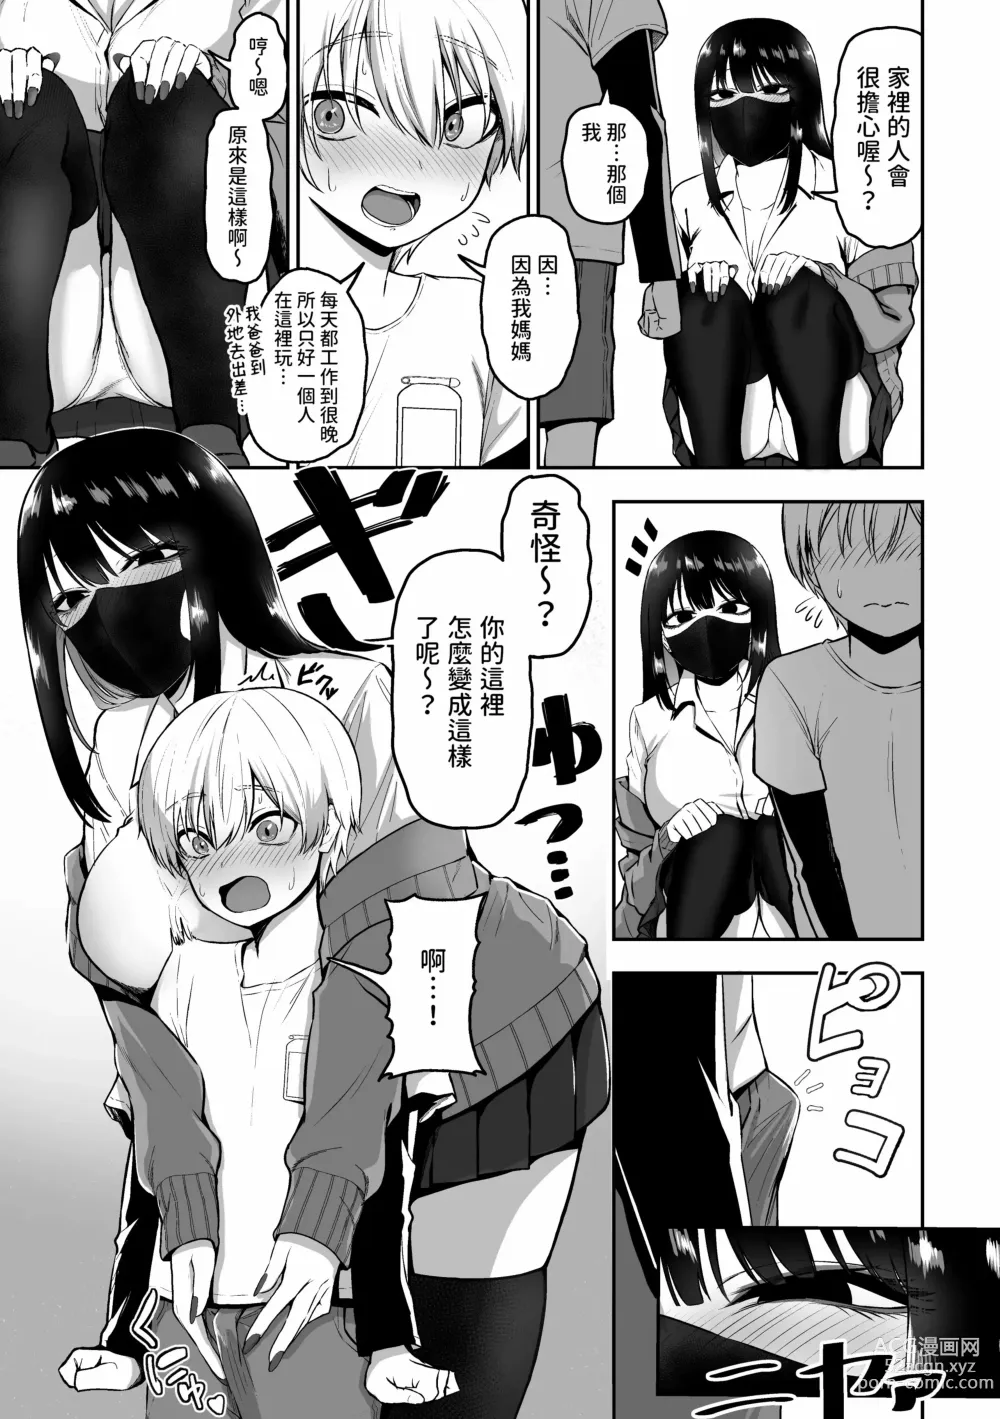 Page 4 of doujinshi 三食纳豆辣妹